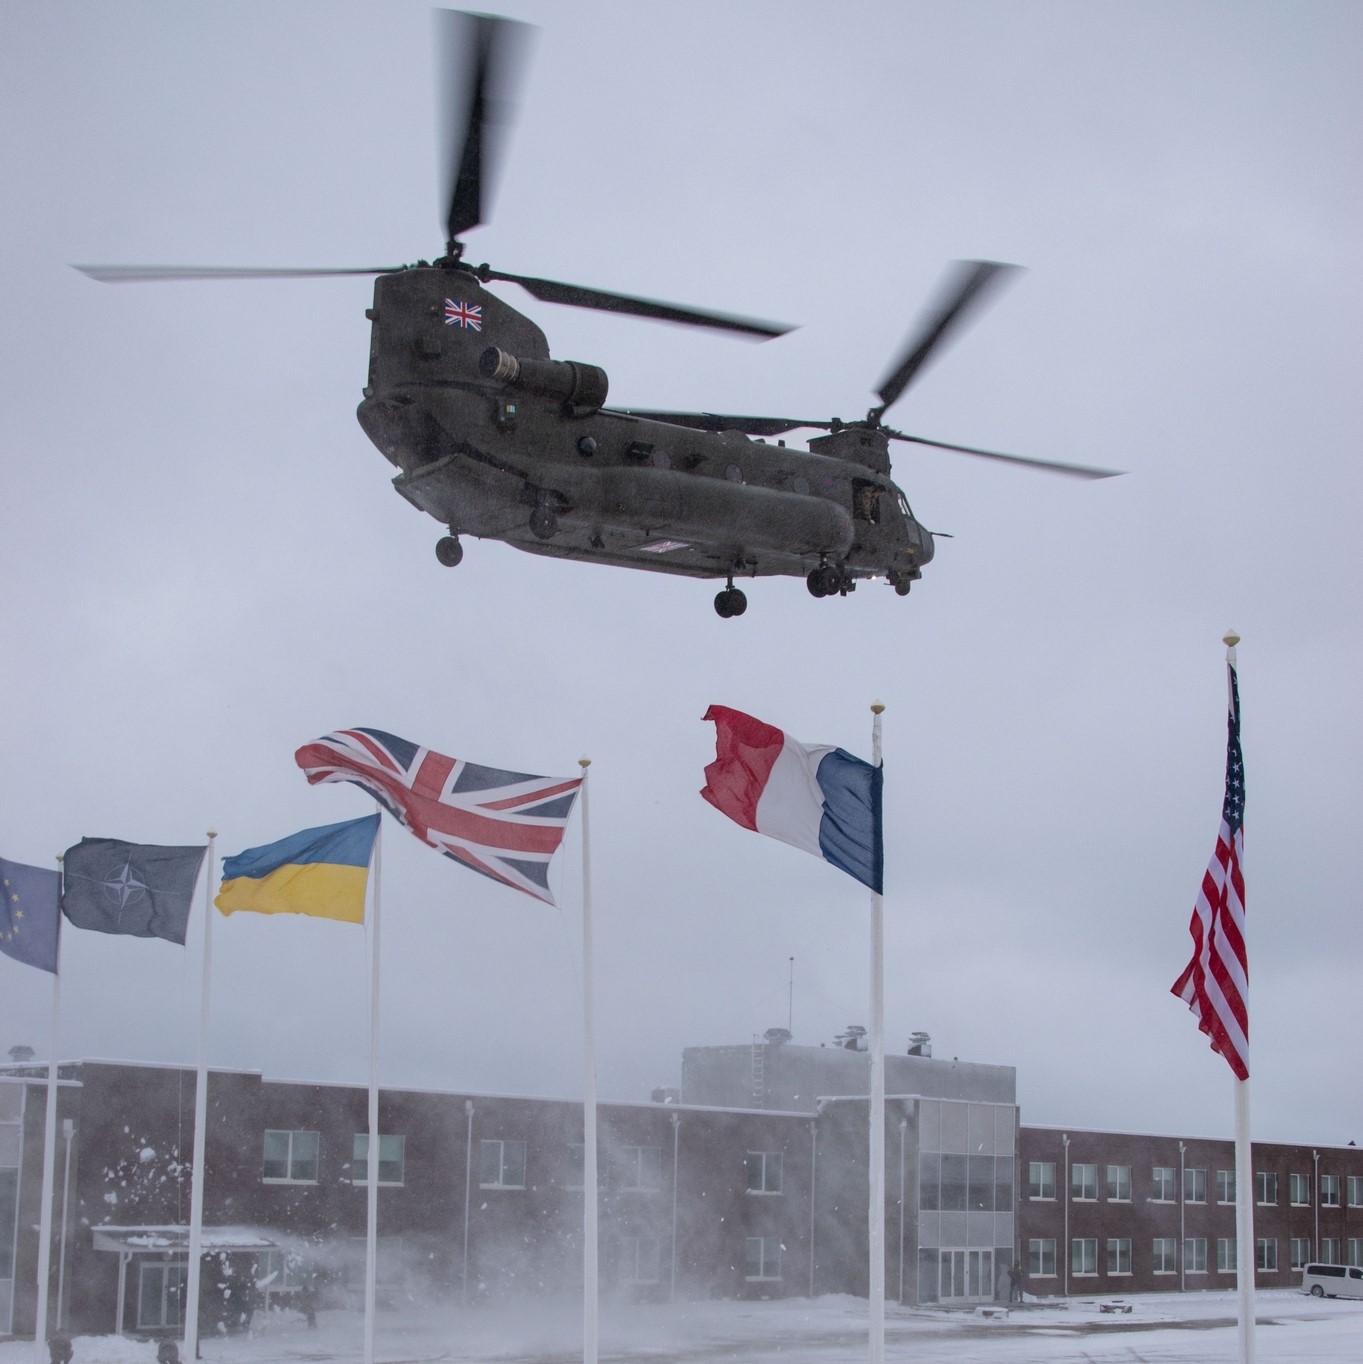 Image shows RAF Chinook flying over a snowy nation ground with flags and building headquarters.